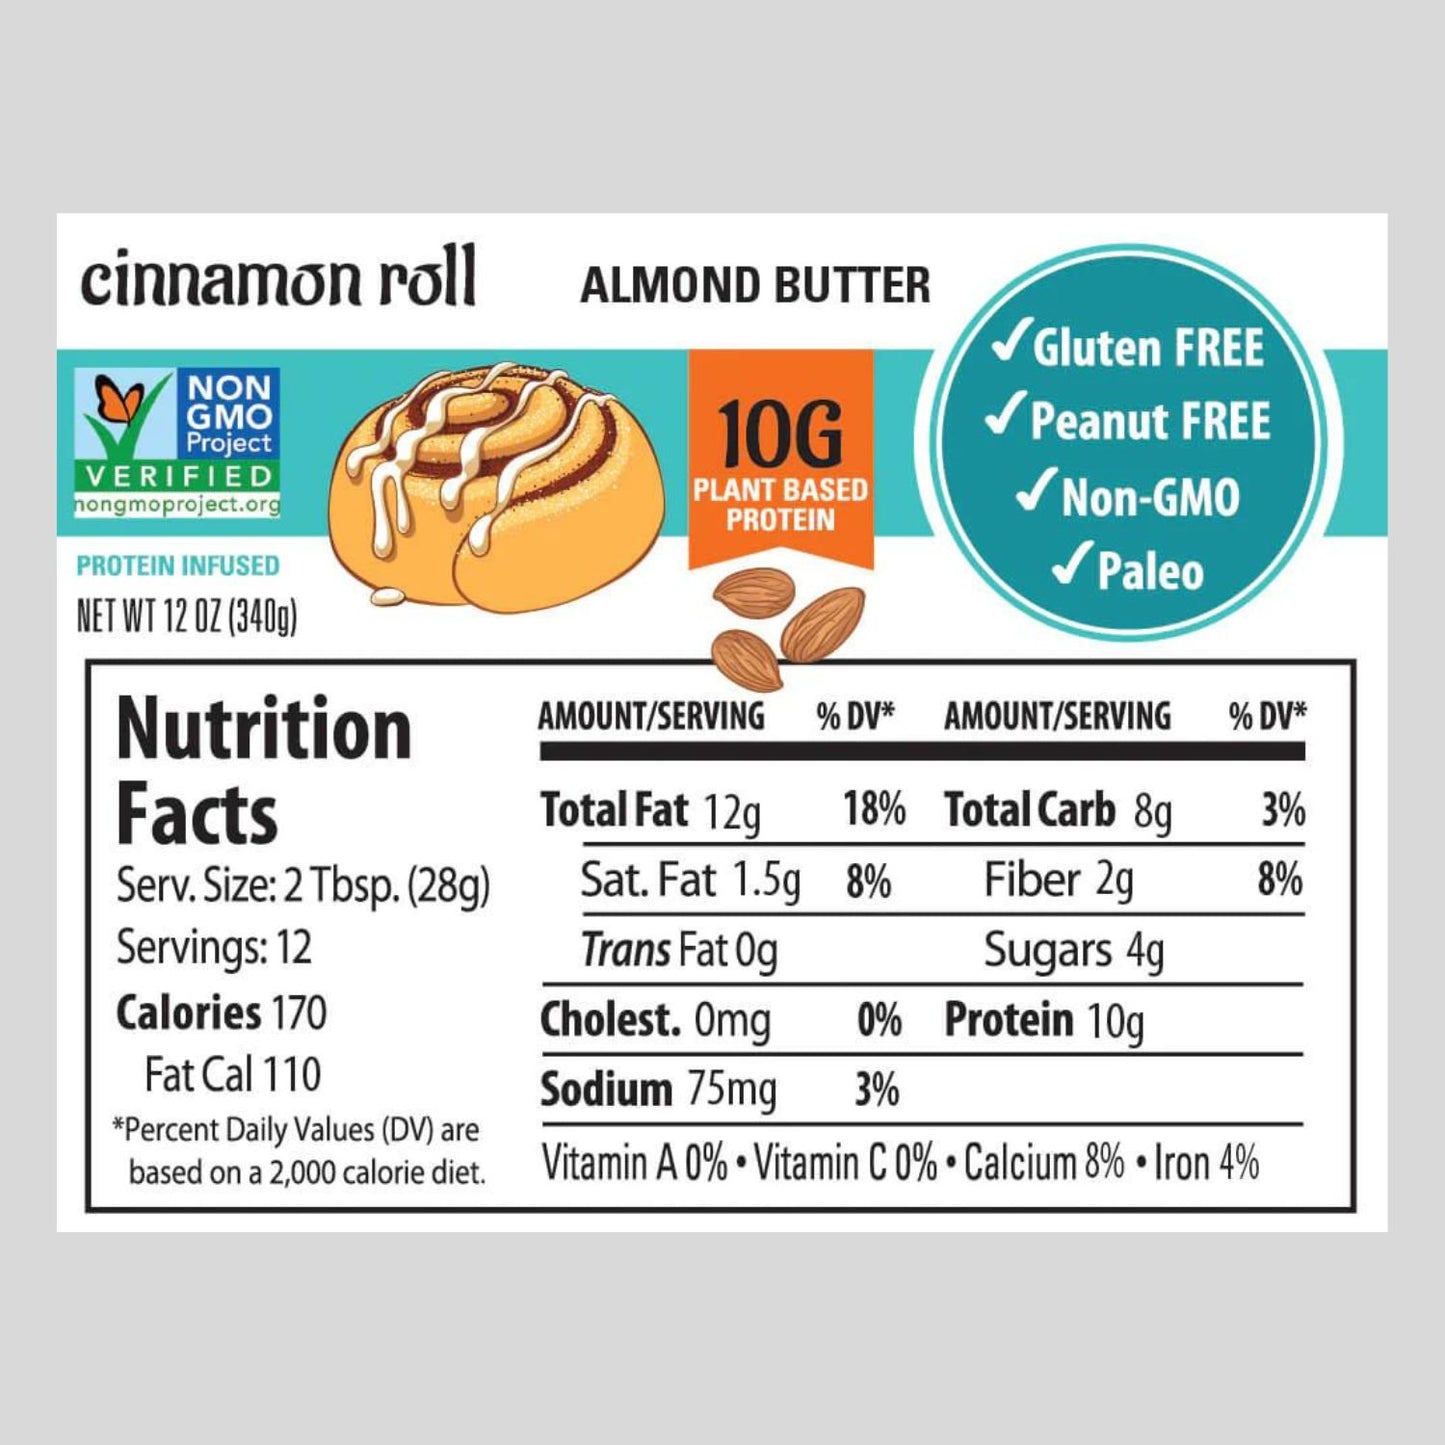 FLAVOR OF THE MONTH! - Cinnamon Roll Protein Almond Butter